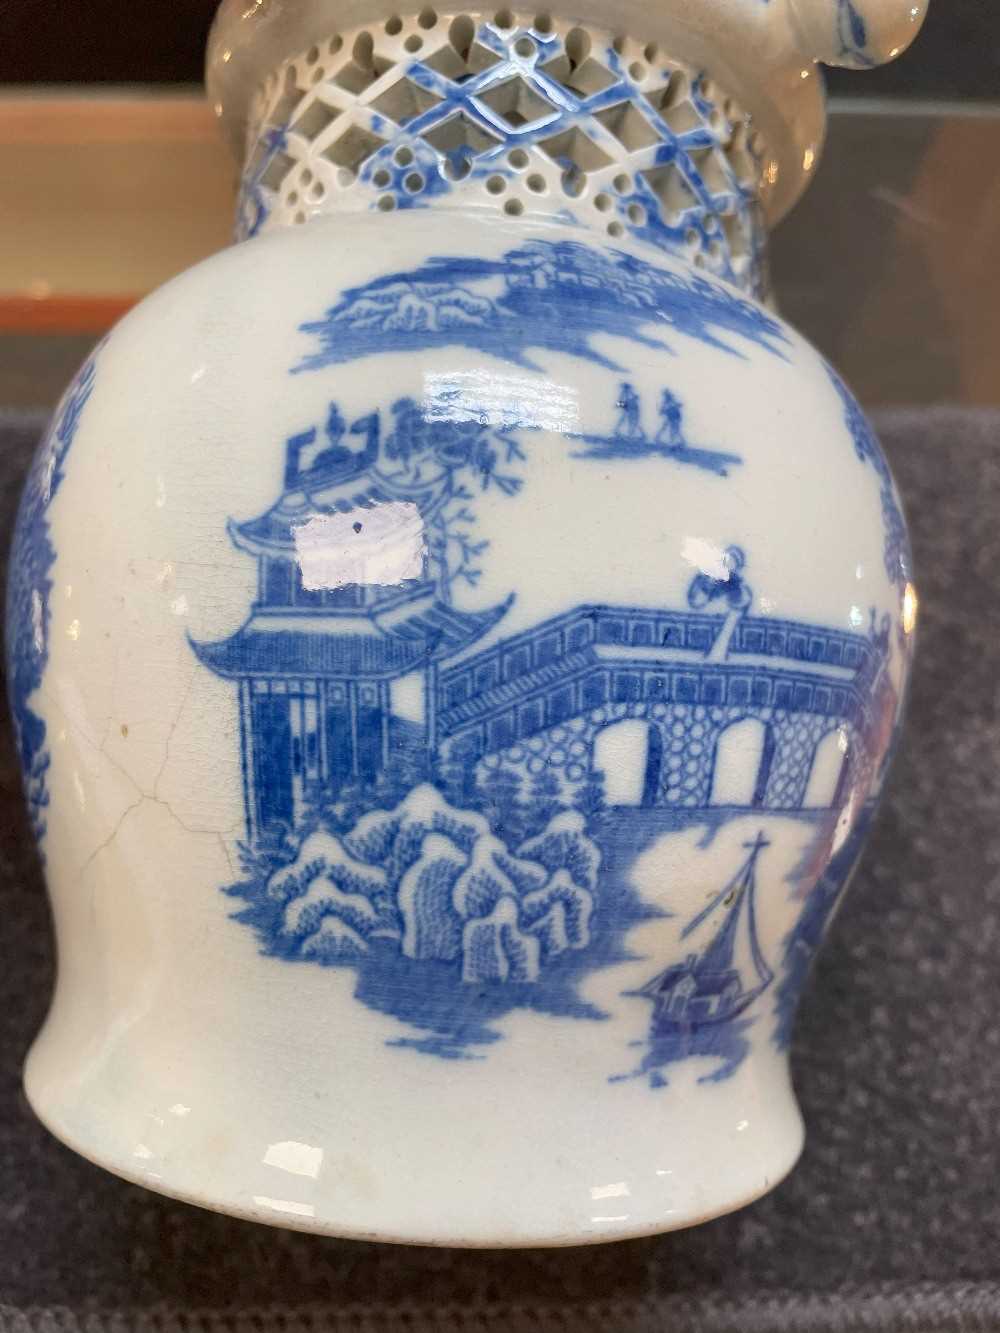 SWANSEA CAMBRIAN PEARLWARE PUZZLE JUG circa 1810, printed in blue with the 'Longbridge' pattern, - Image 10 of 20